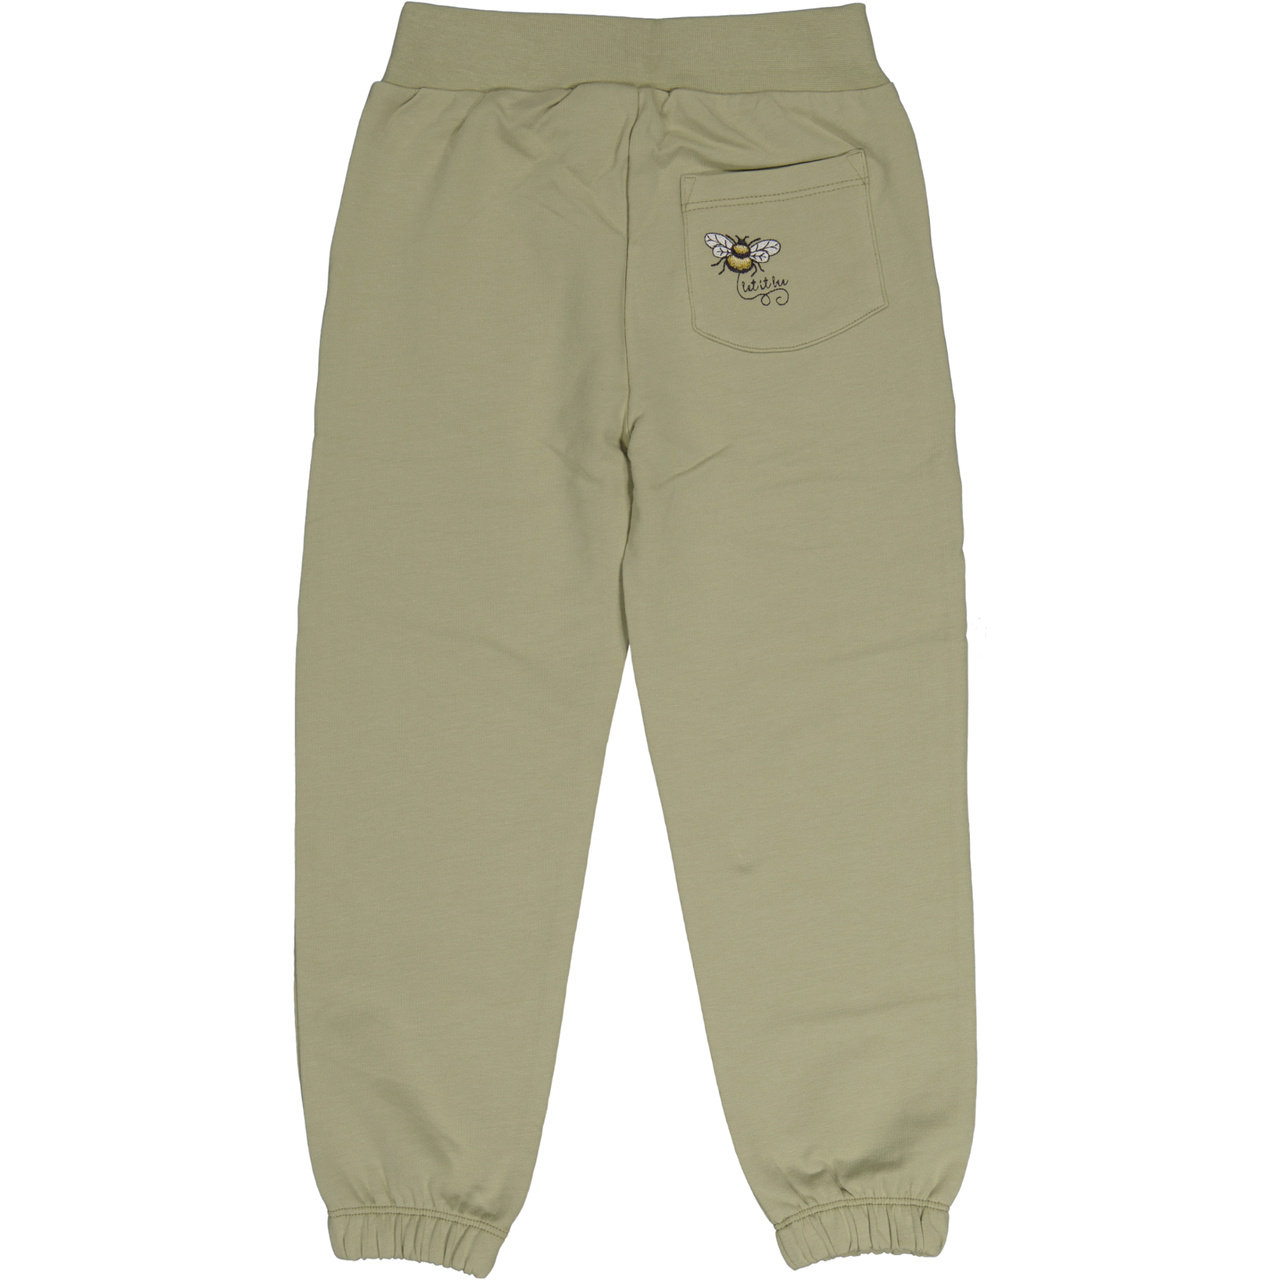 College trousers Olive 110/116